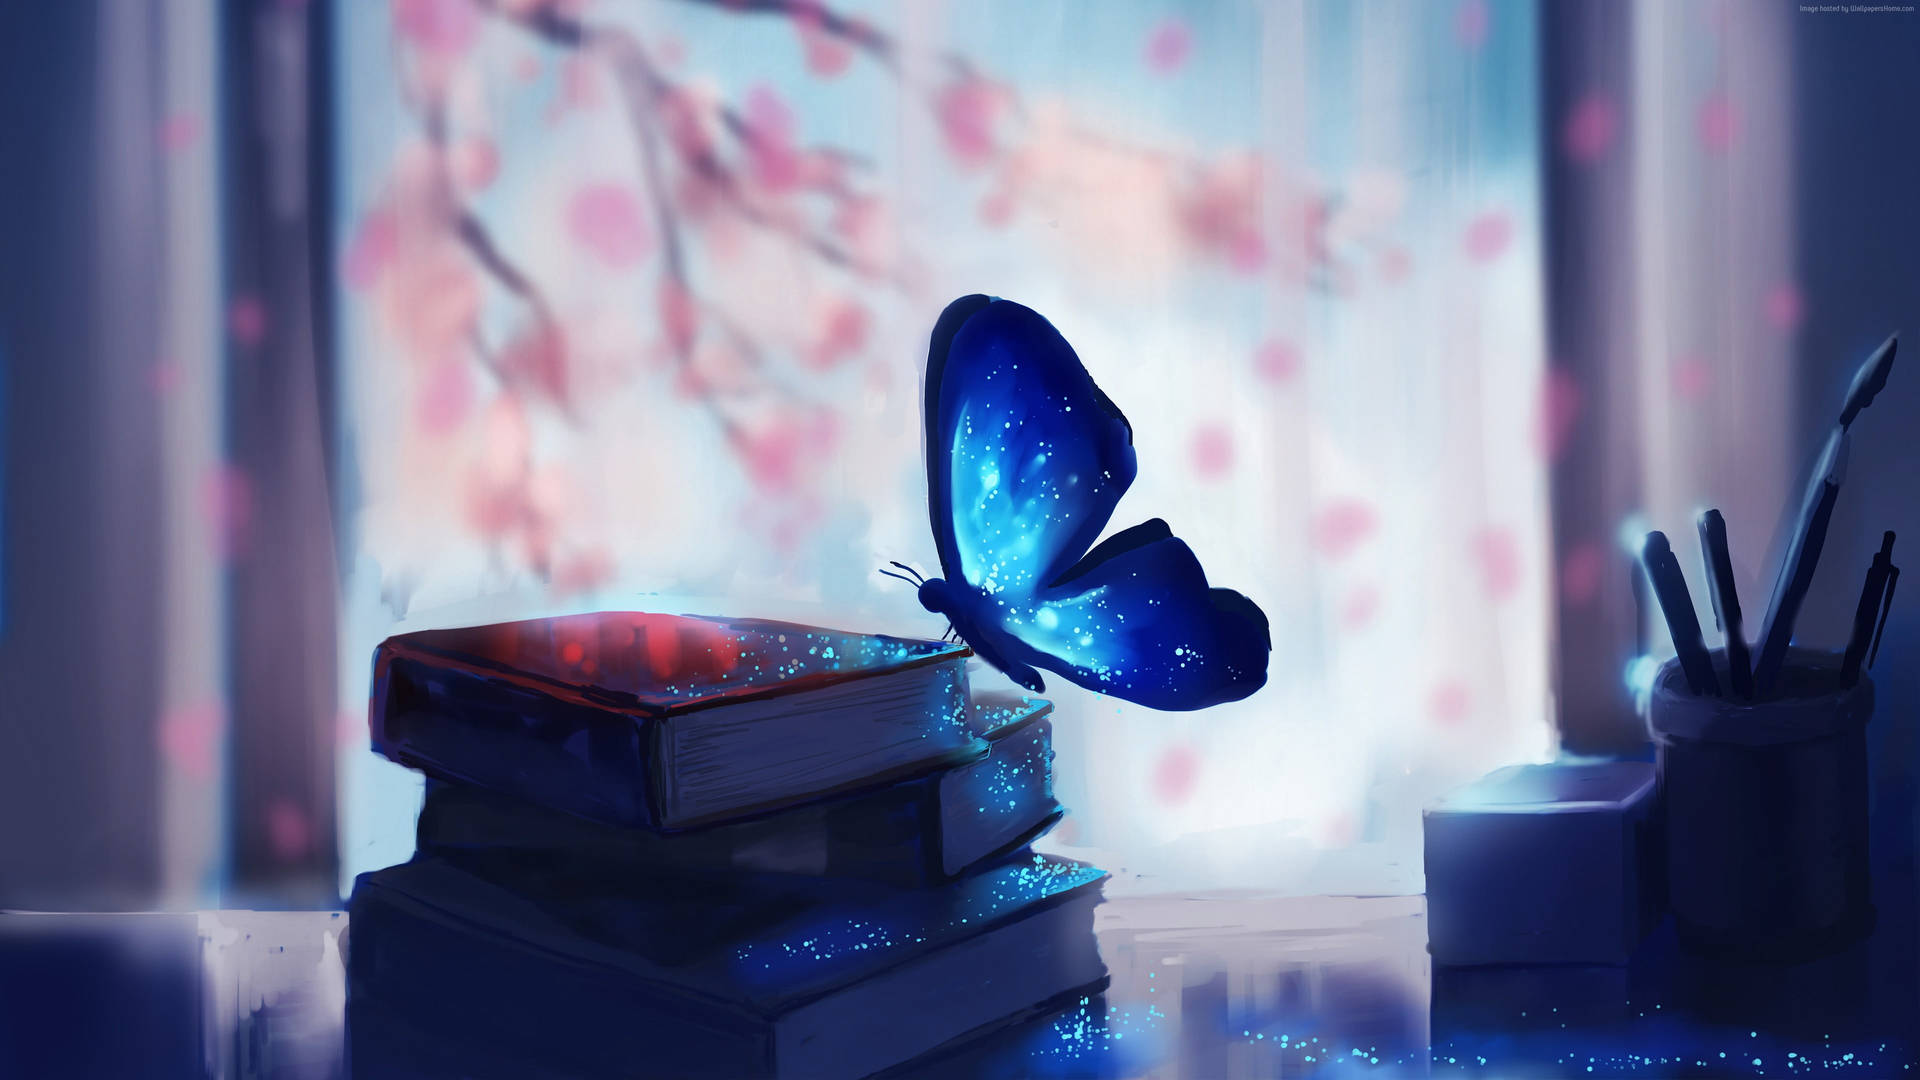 Mystical Butterfly Bookish Theme Wallpaper